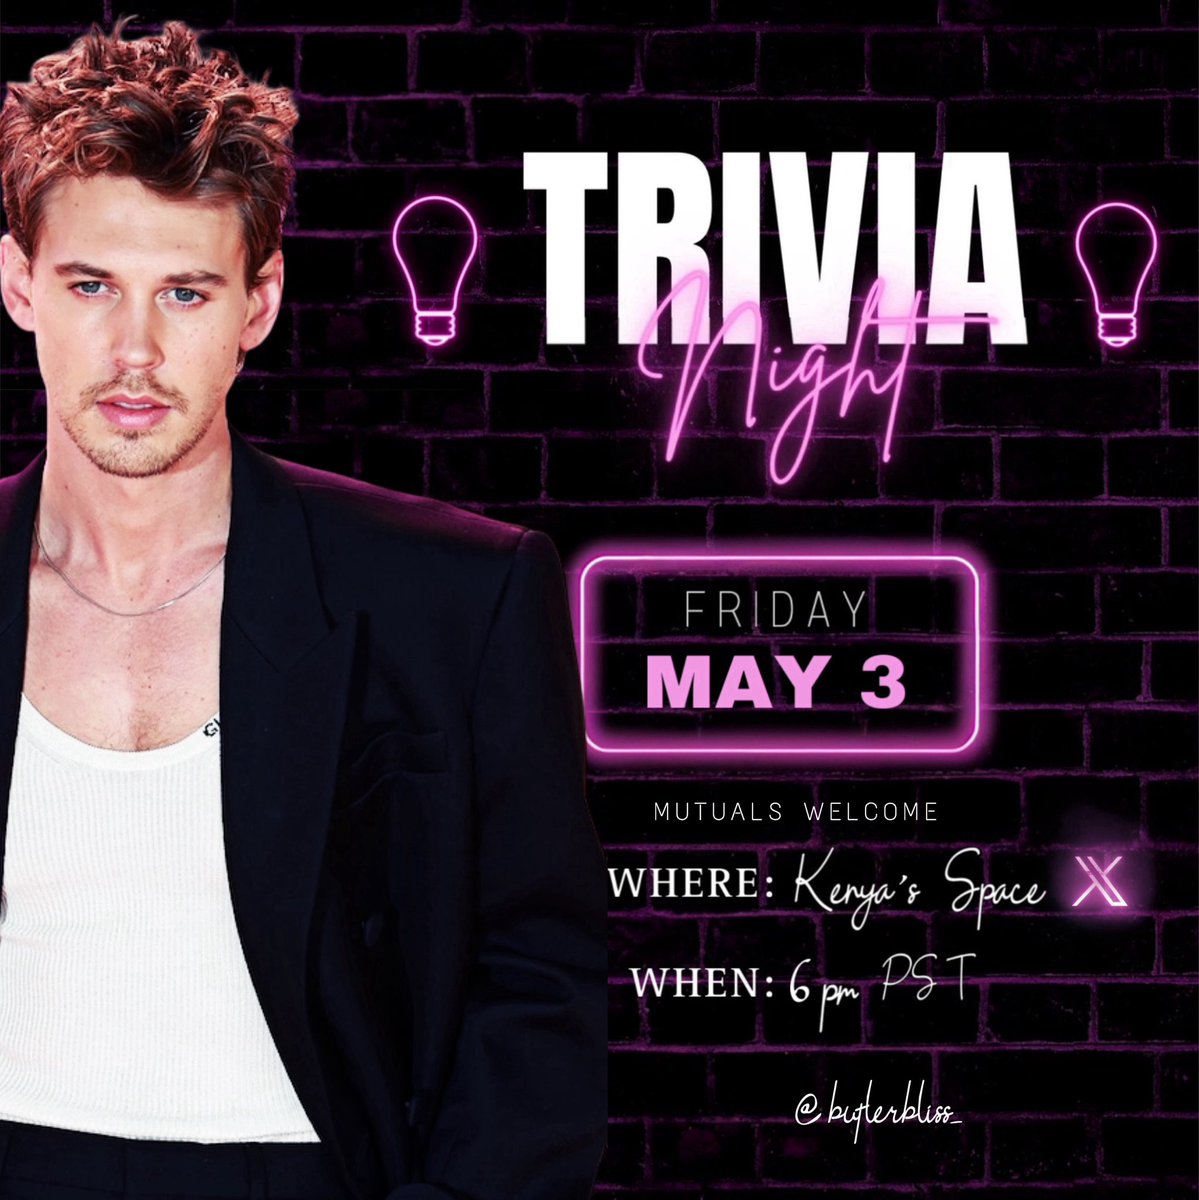 Join me this Friday for a special Austin Butler Trivia Night. Let’s have some fun and I hope to see you there! 🤍